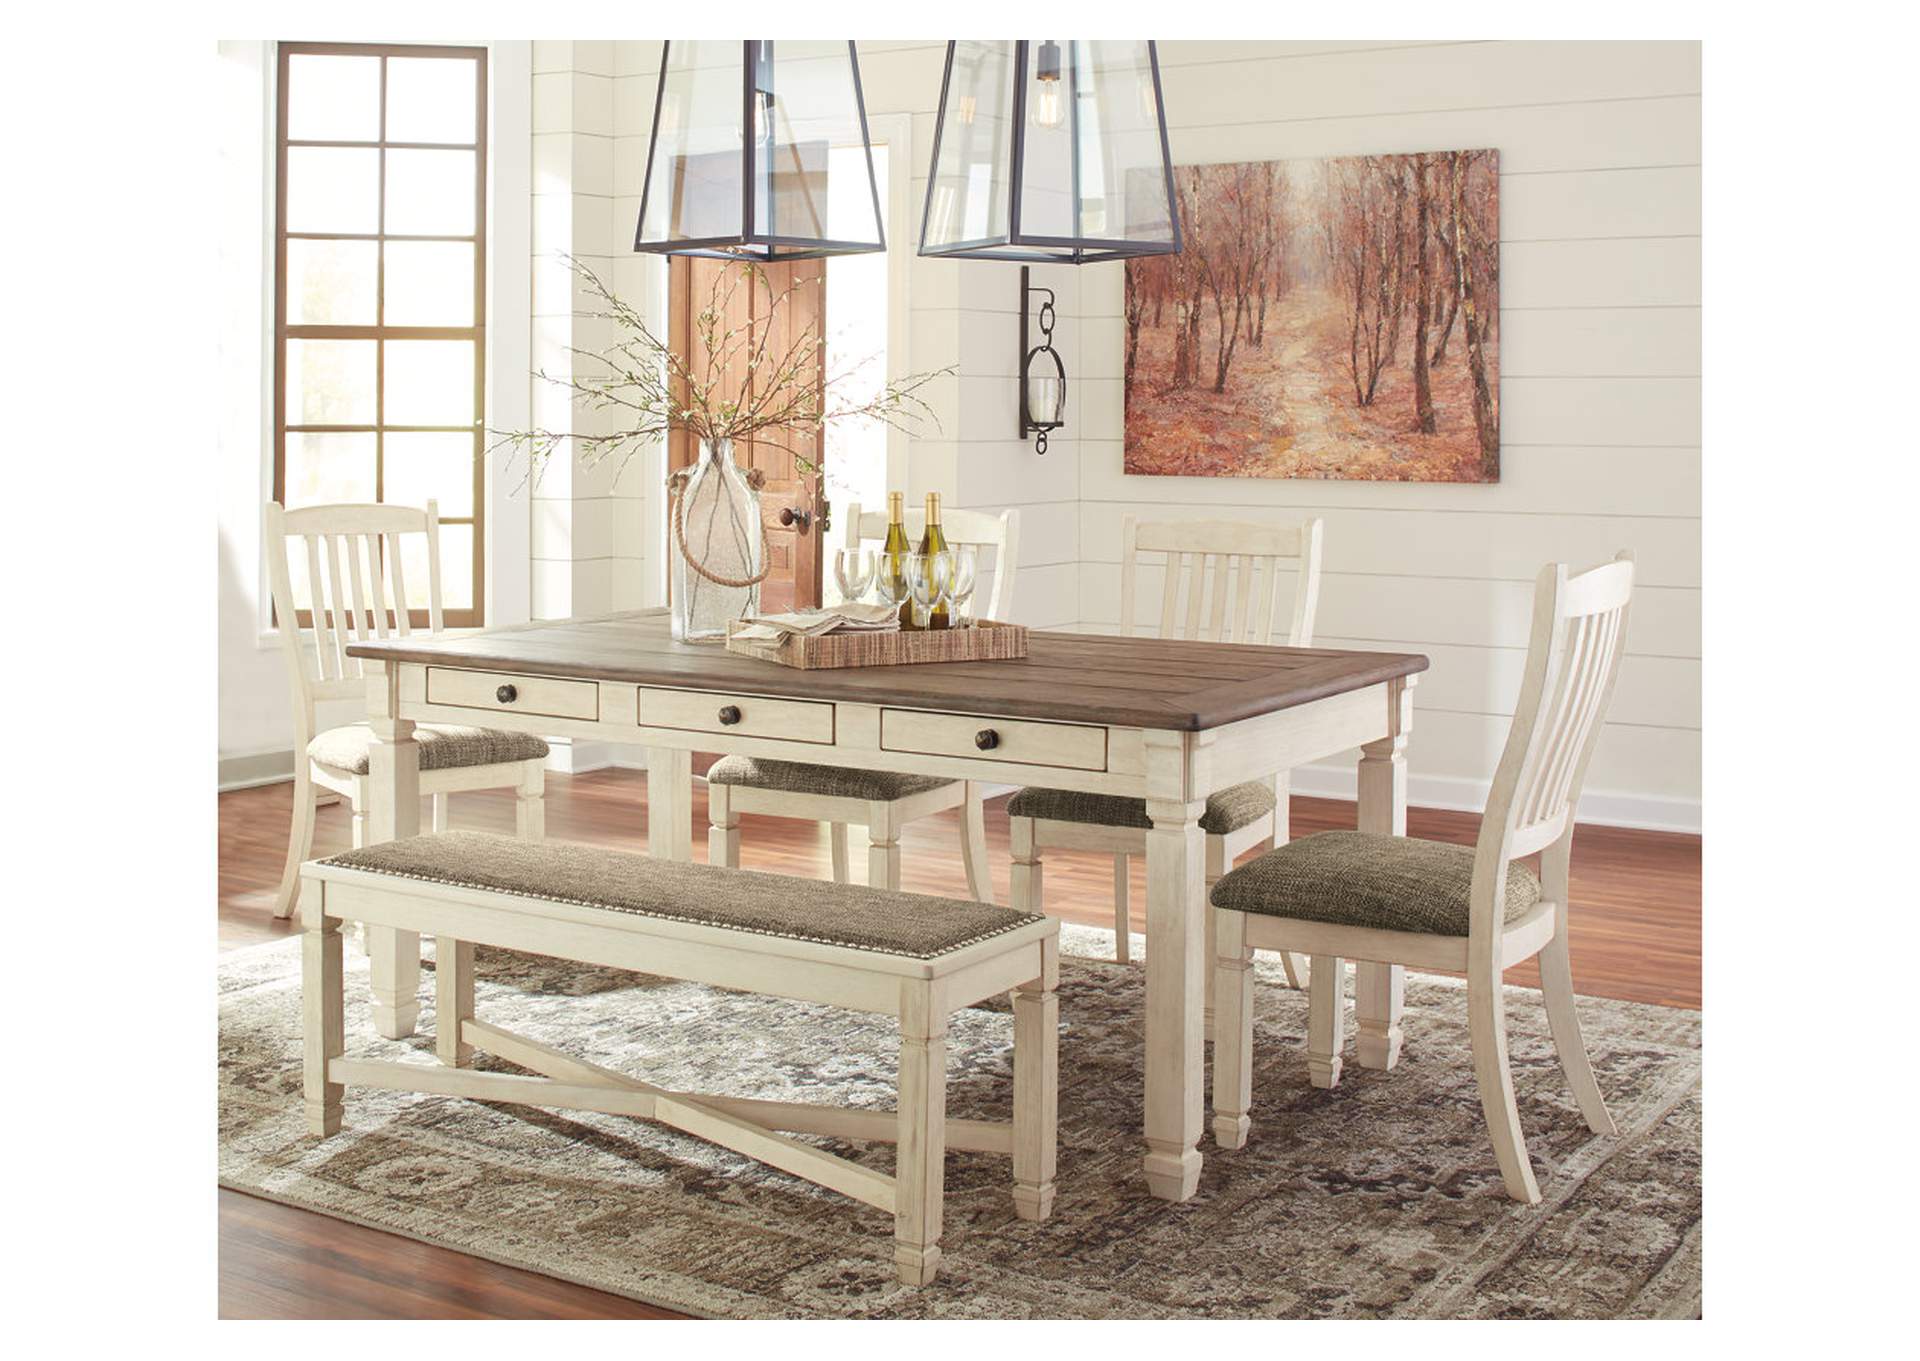 Bolanburg Dining Table and 4 Chairs and Bench,Signature Design By Ashley